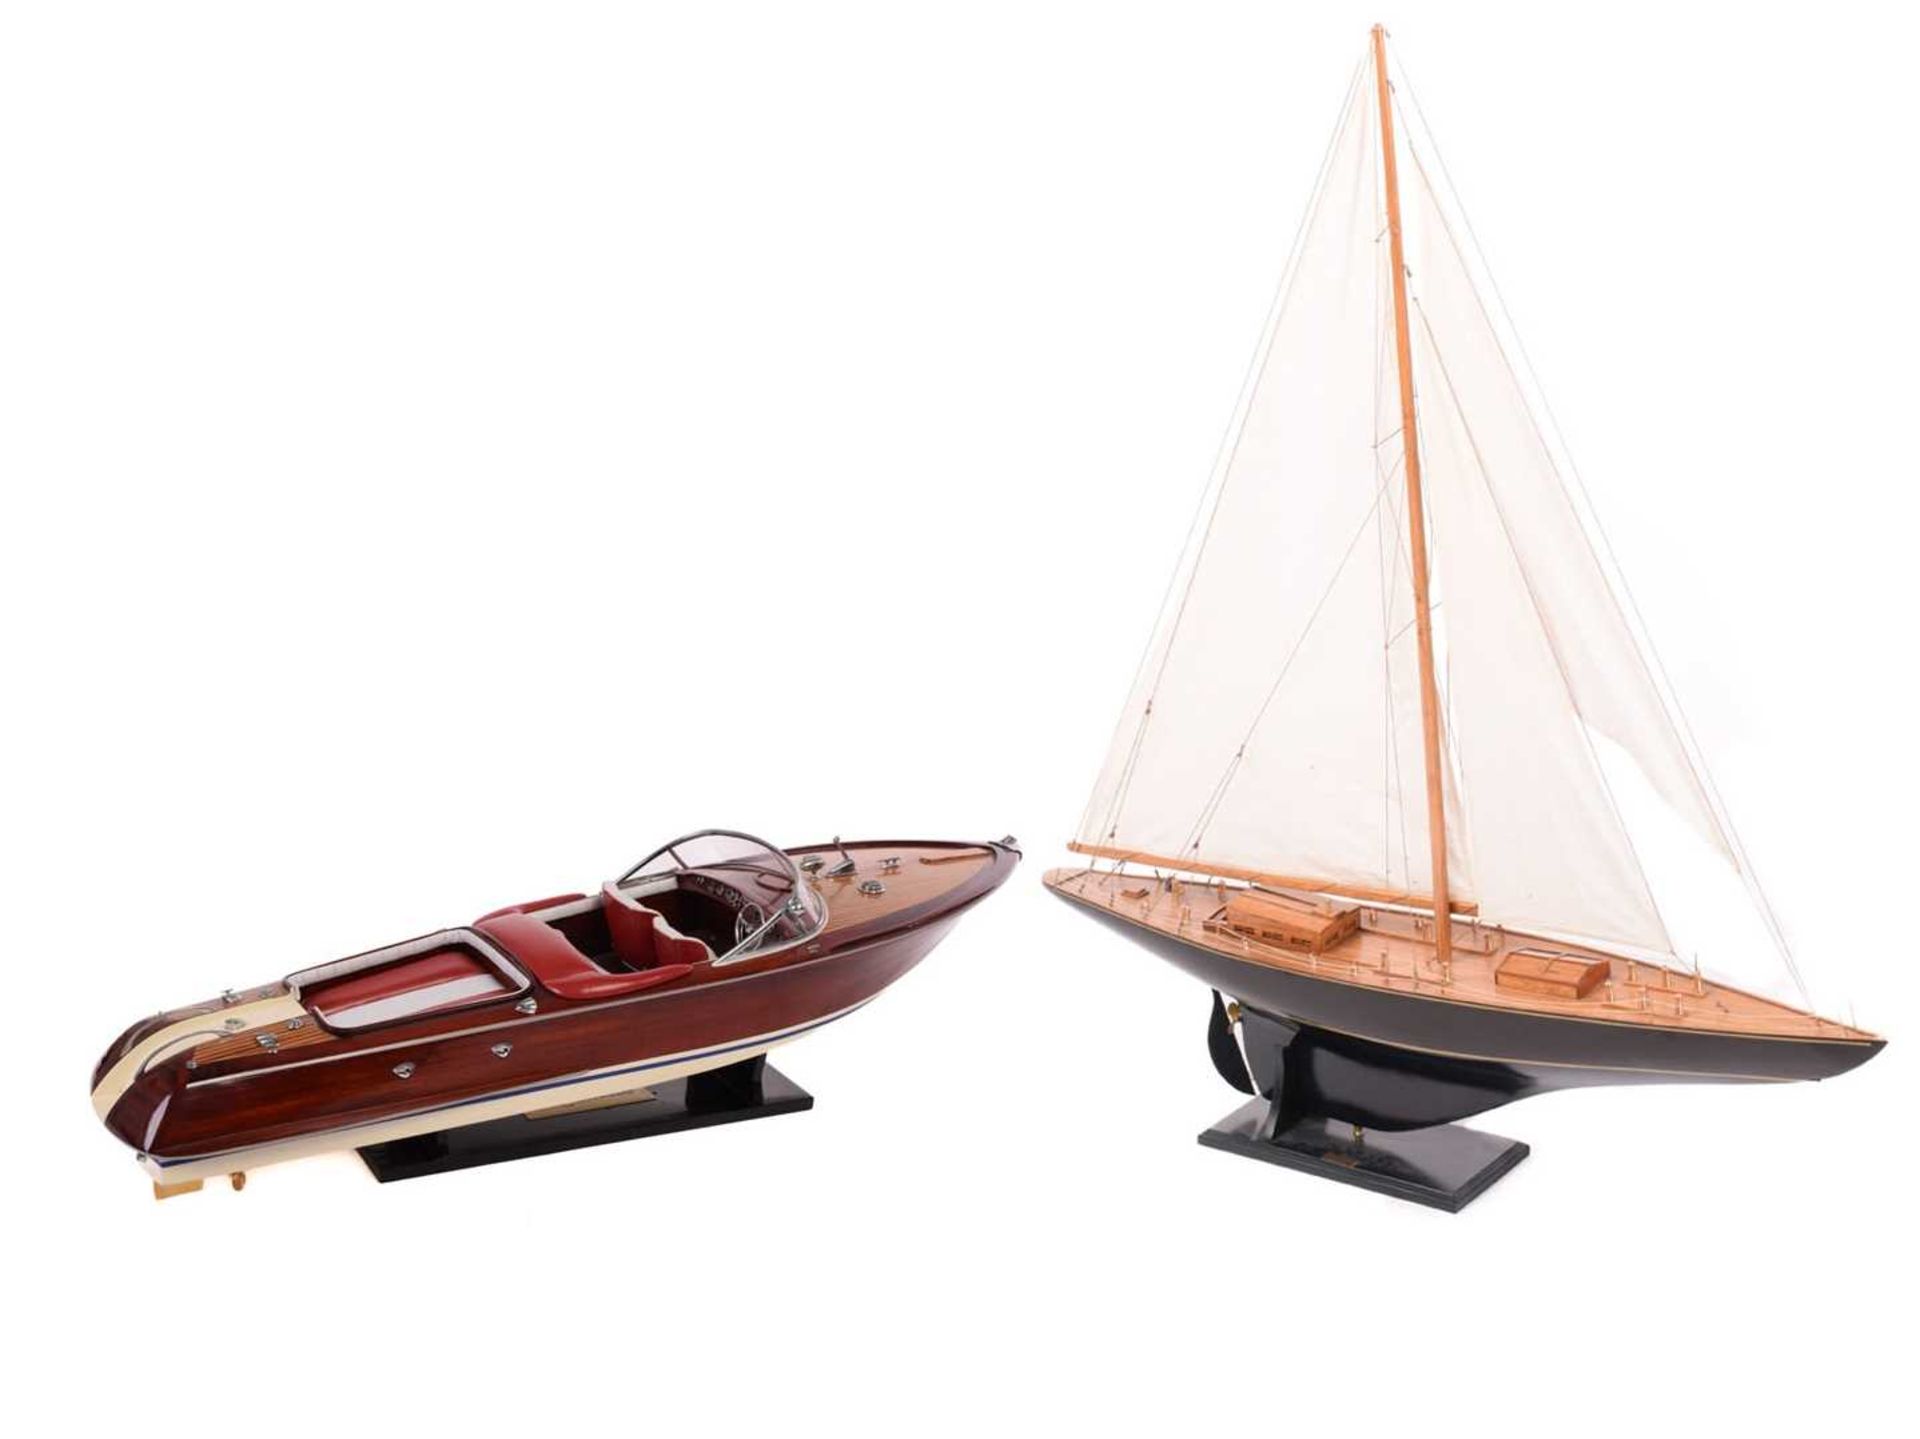 A painted and stained wood model of the yacht 'Endeavour', with fabric sales and rigging on a titled